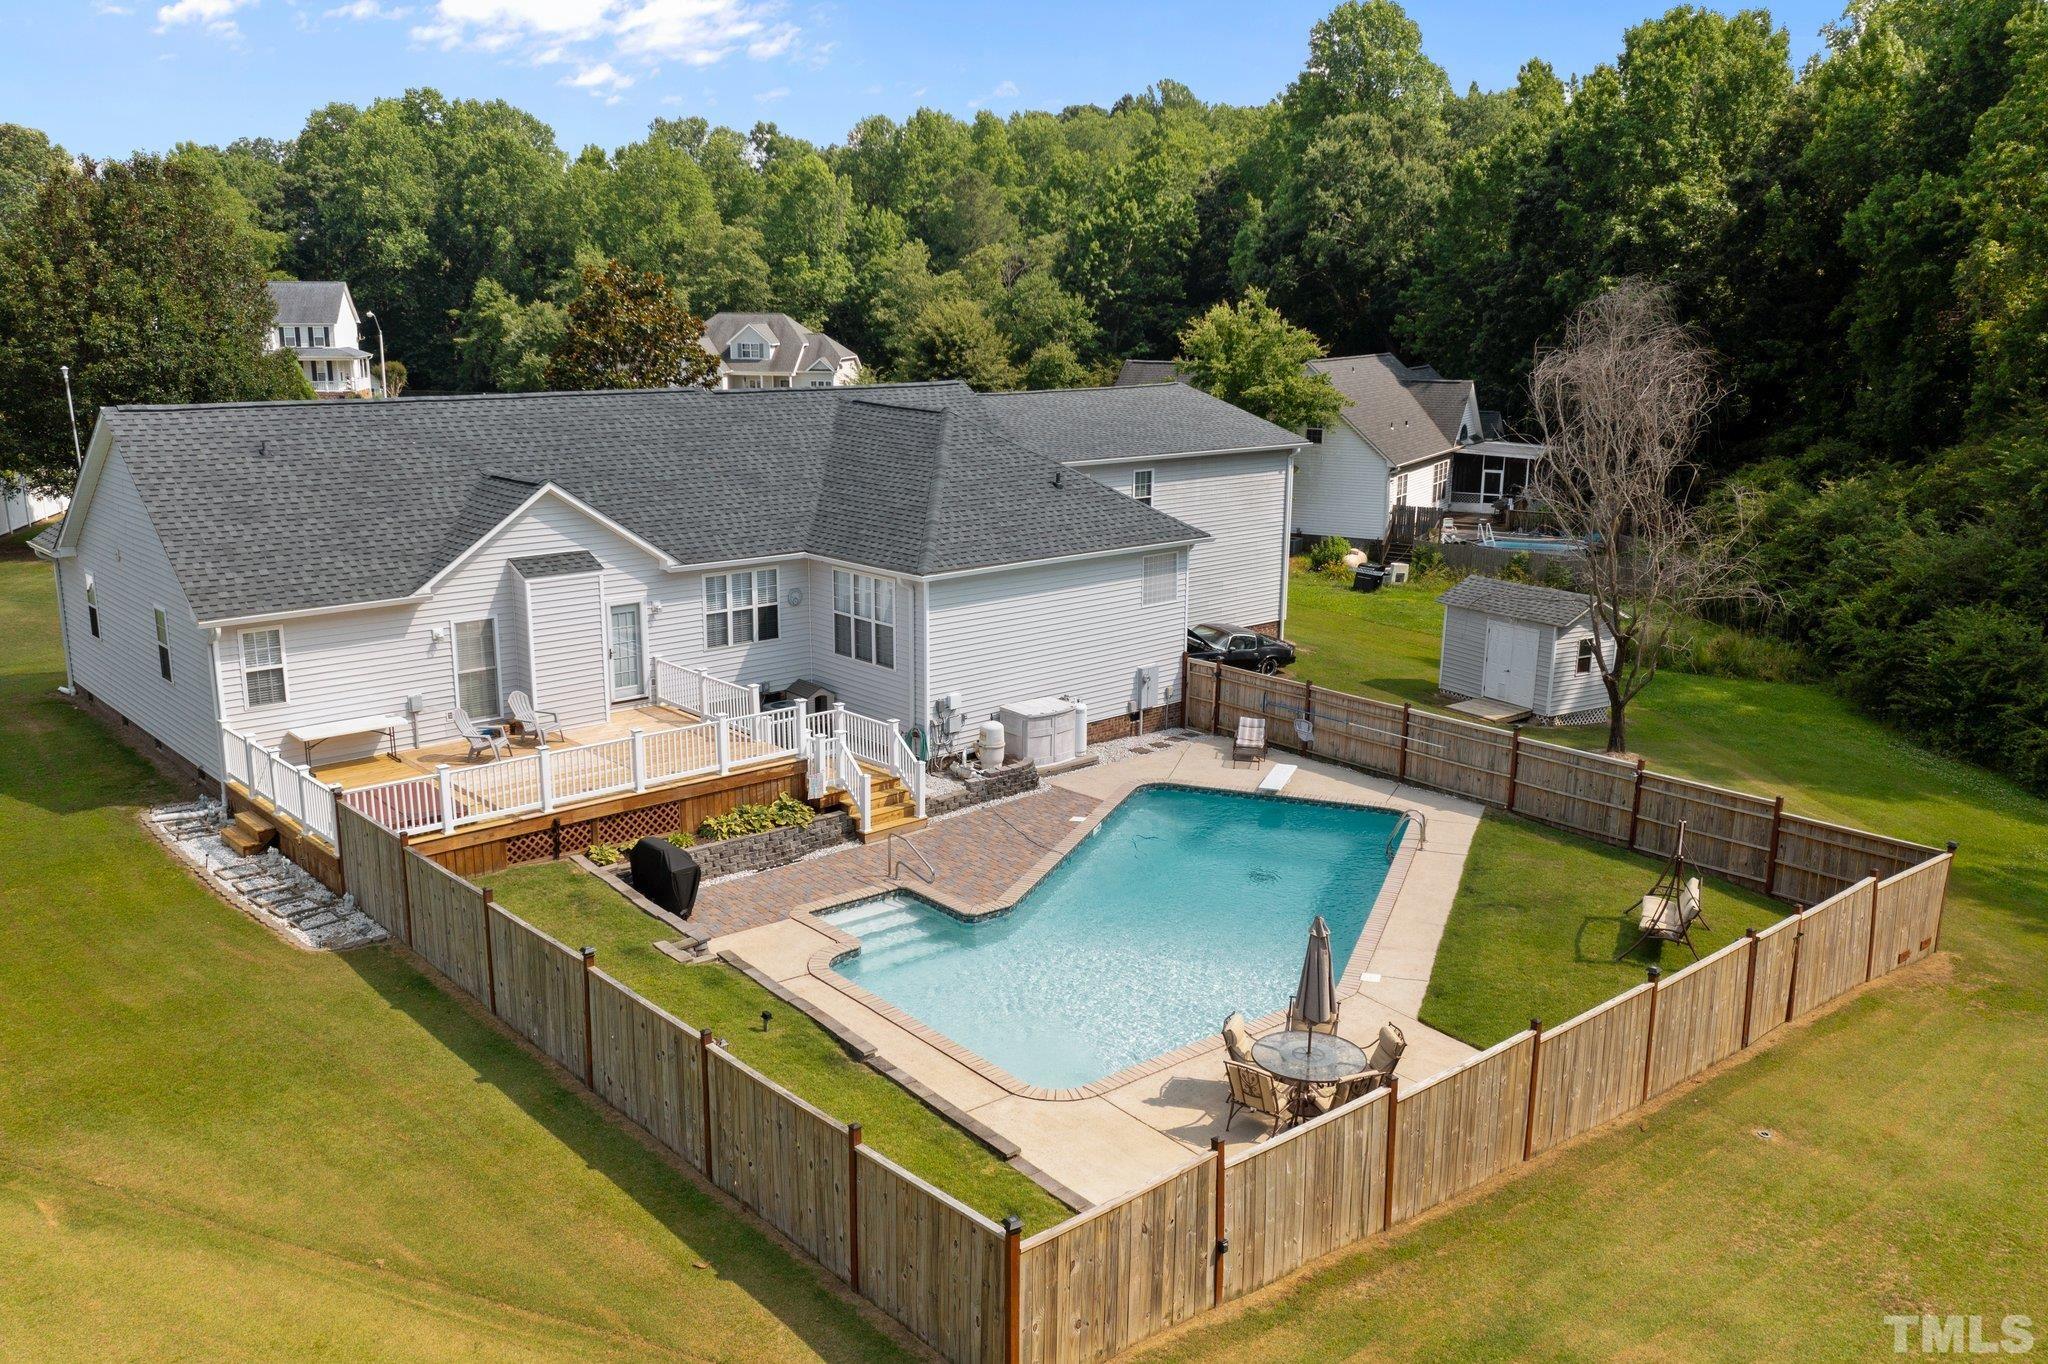 View of house, deck and fenced pool